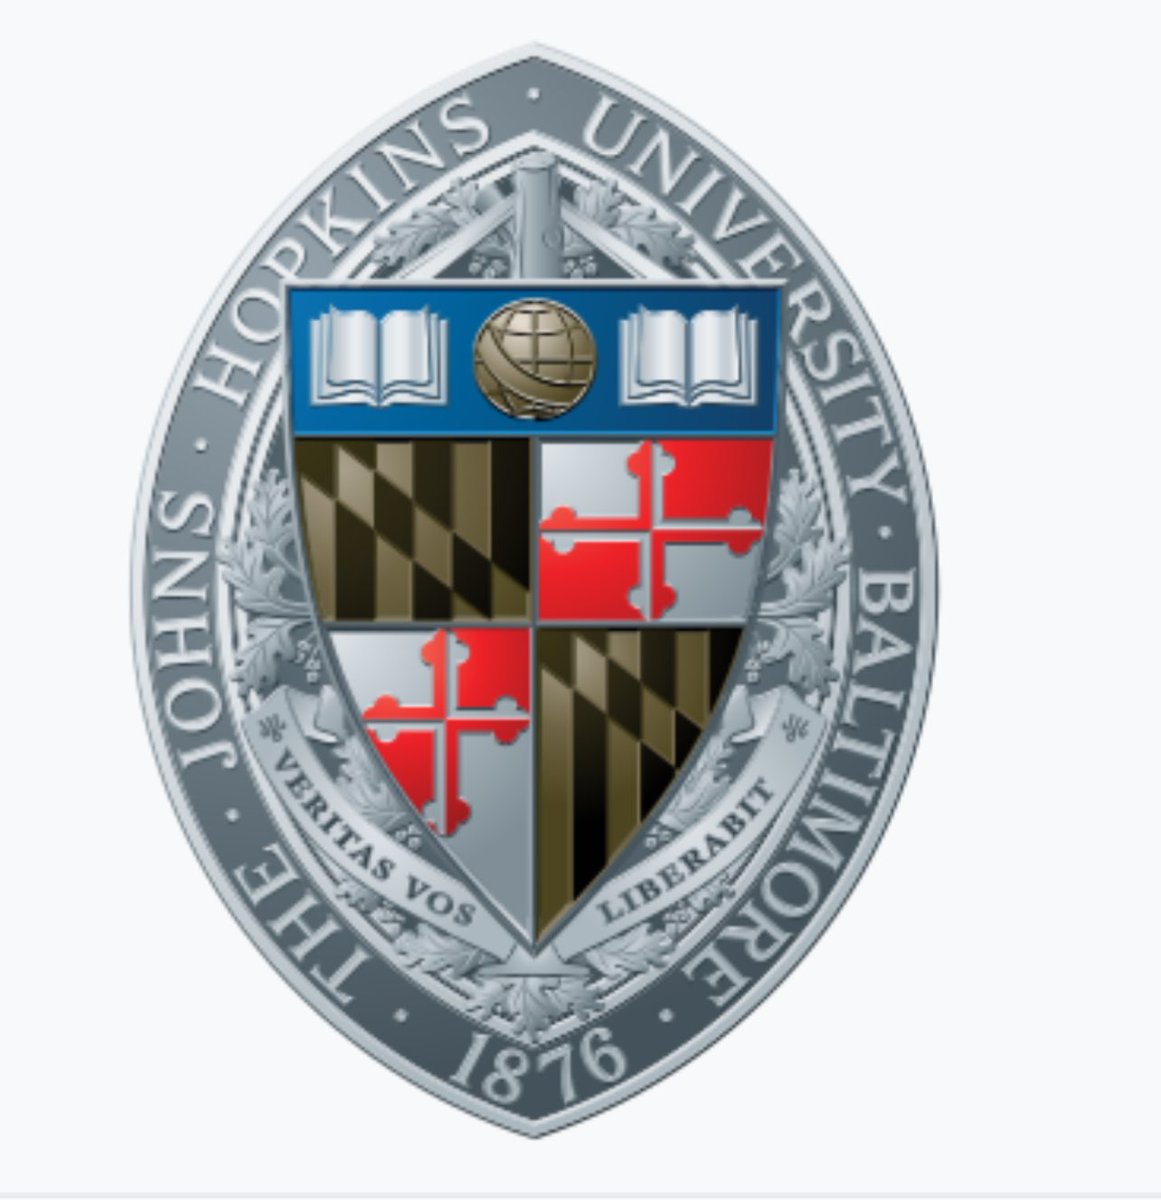 have been trying to incorporate the academic seals of the Universities I’m visiting, in my remarks. the academic seal of Hopkins reads “Veritas vos liberabit” —translated “the truth will set you free”